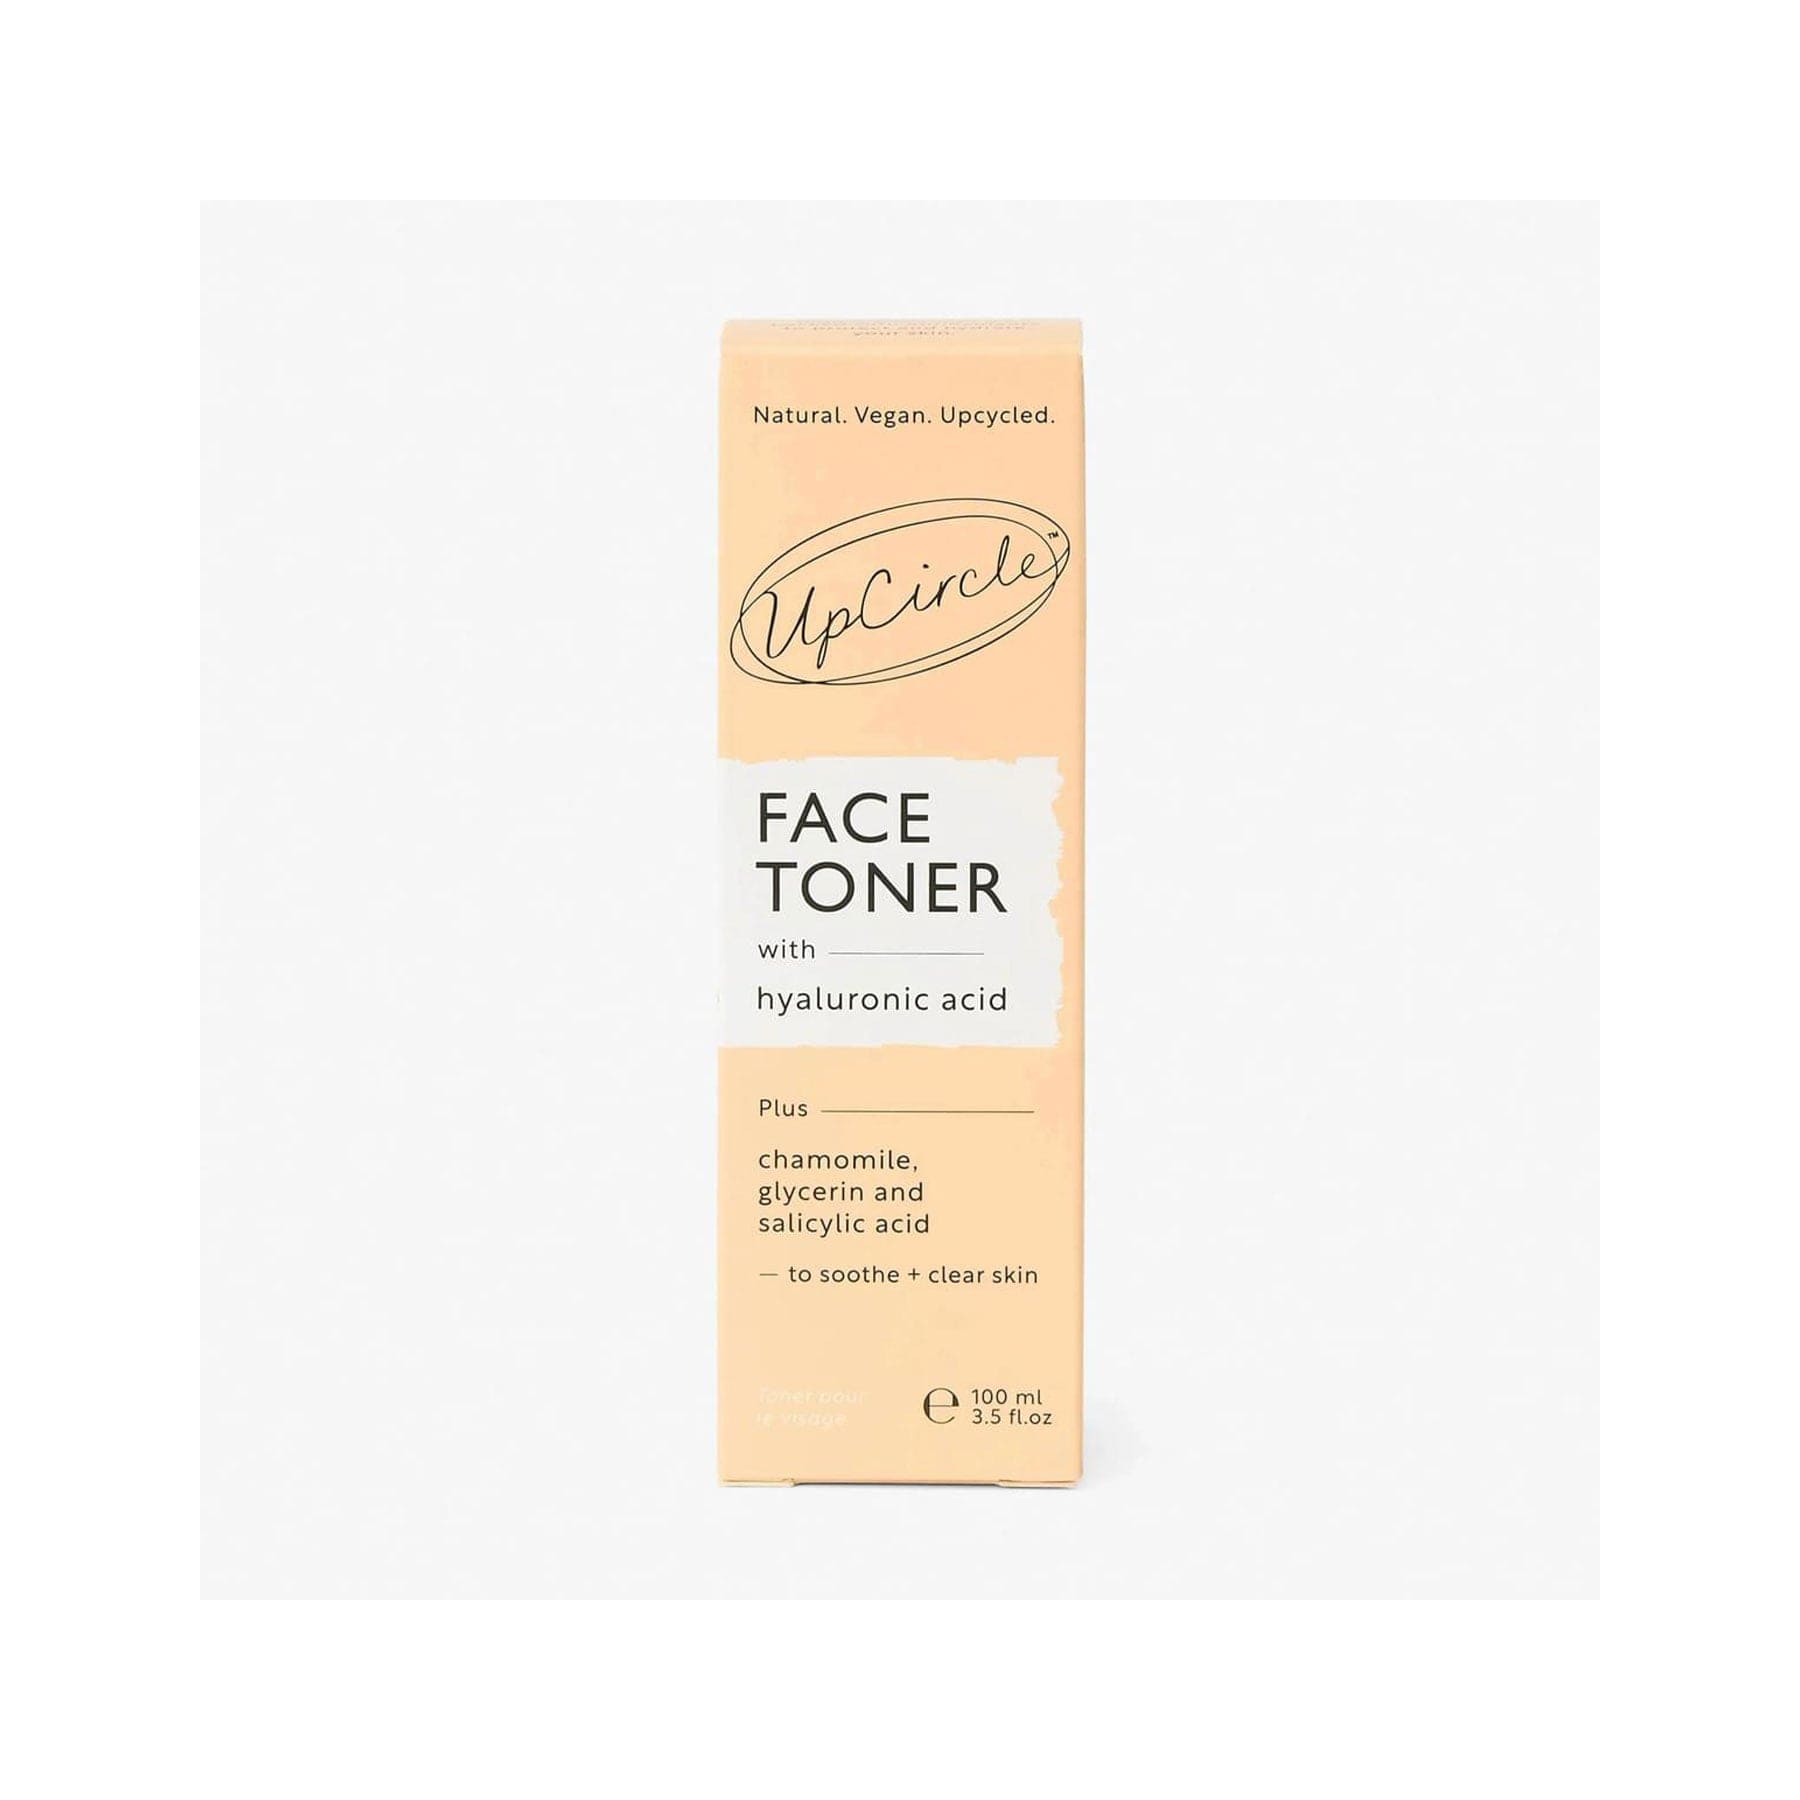 Face toner with hyaluronic acid 100ml